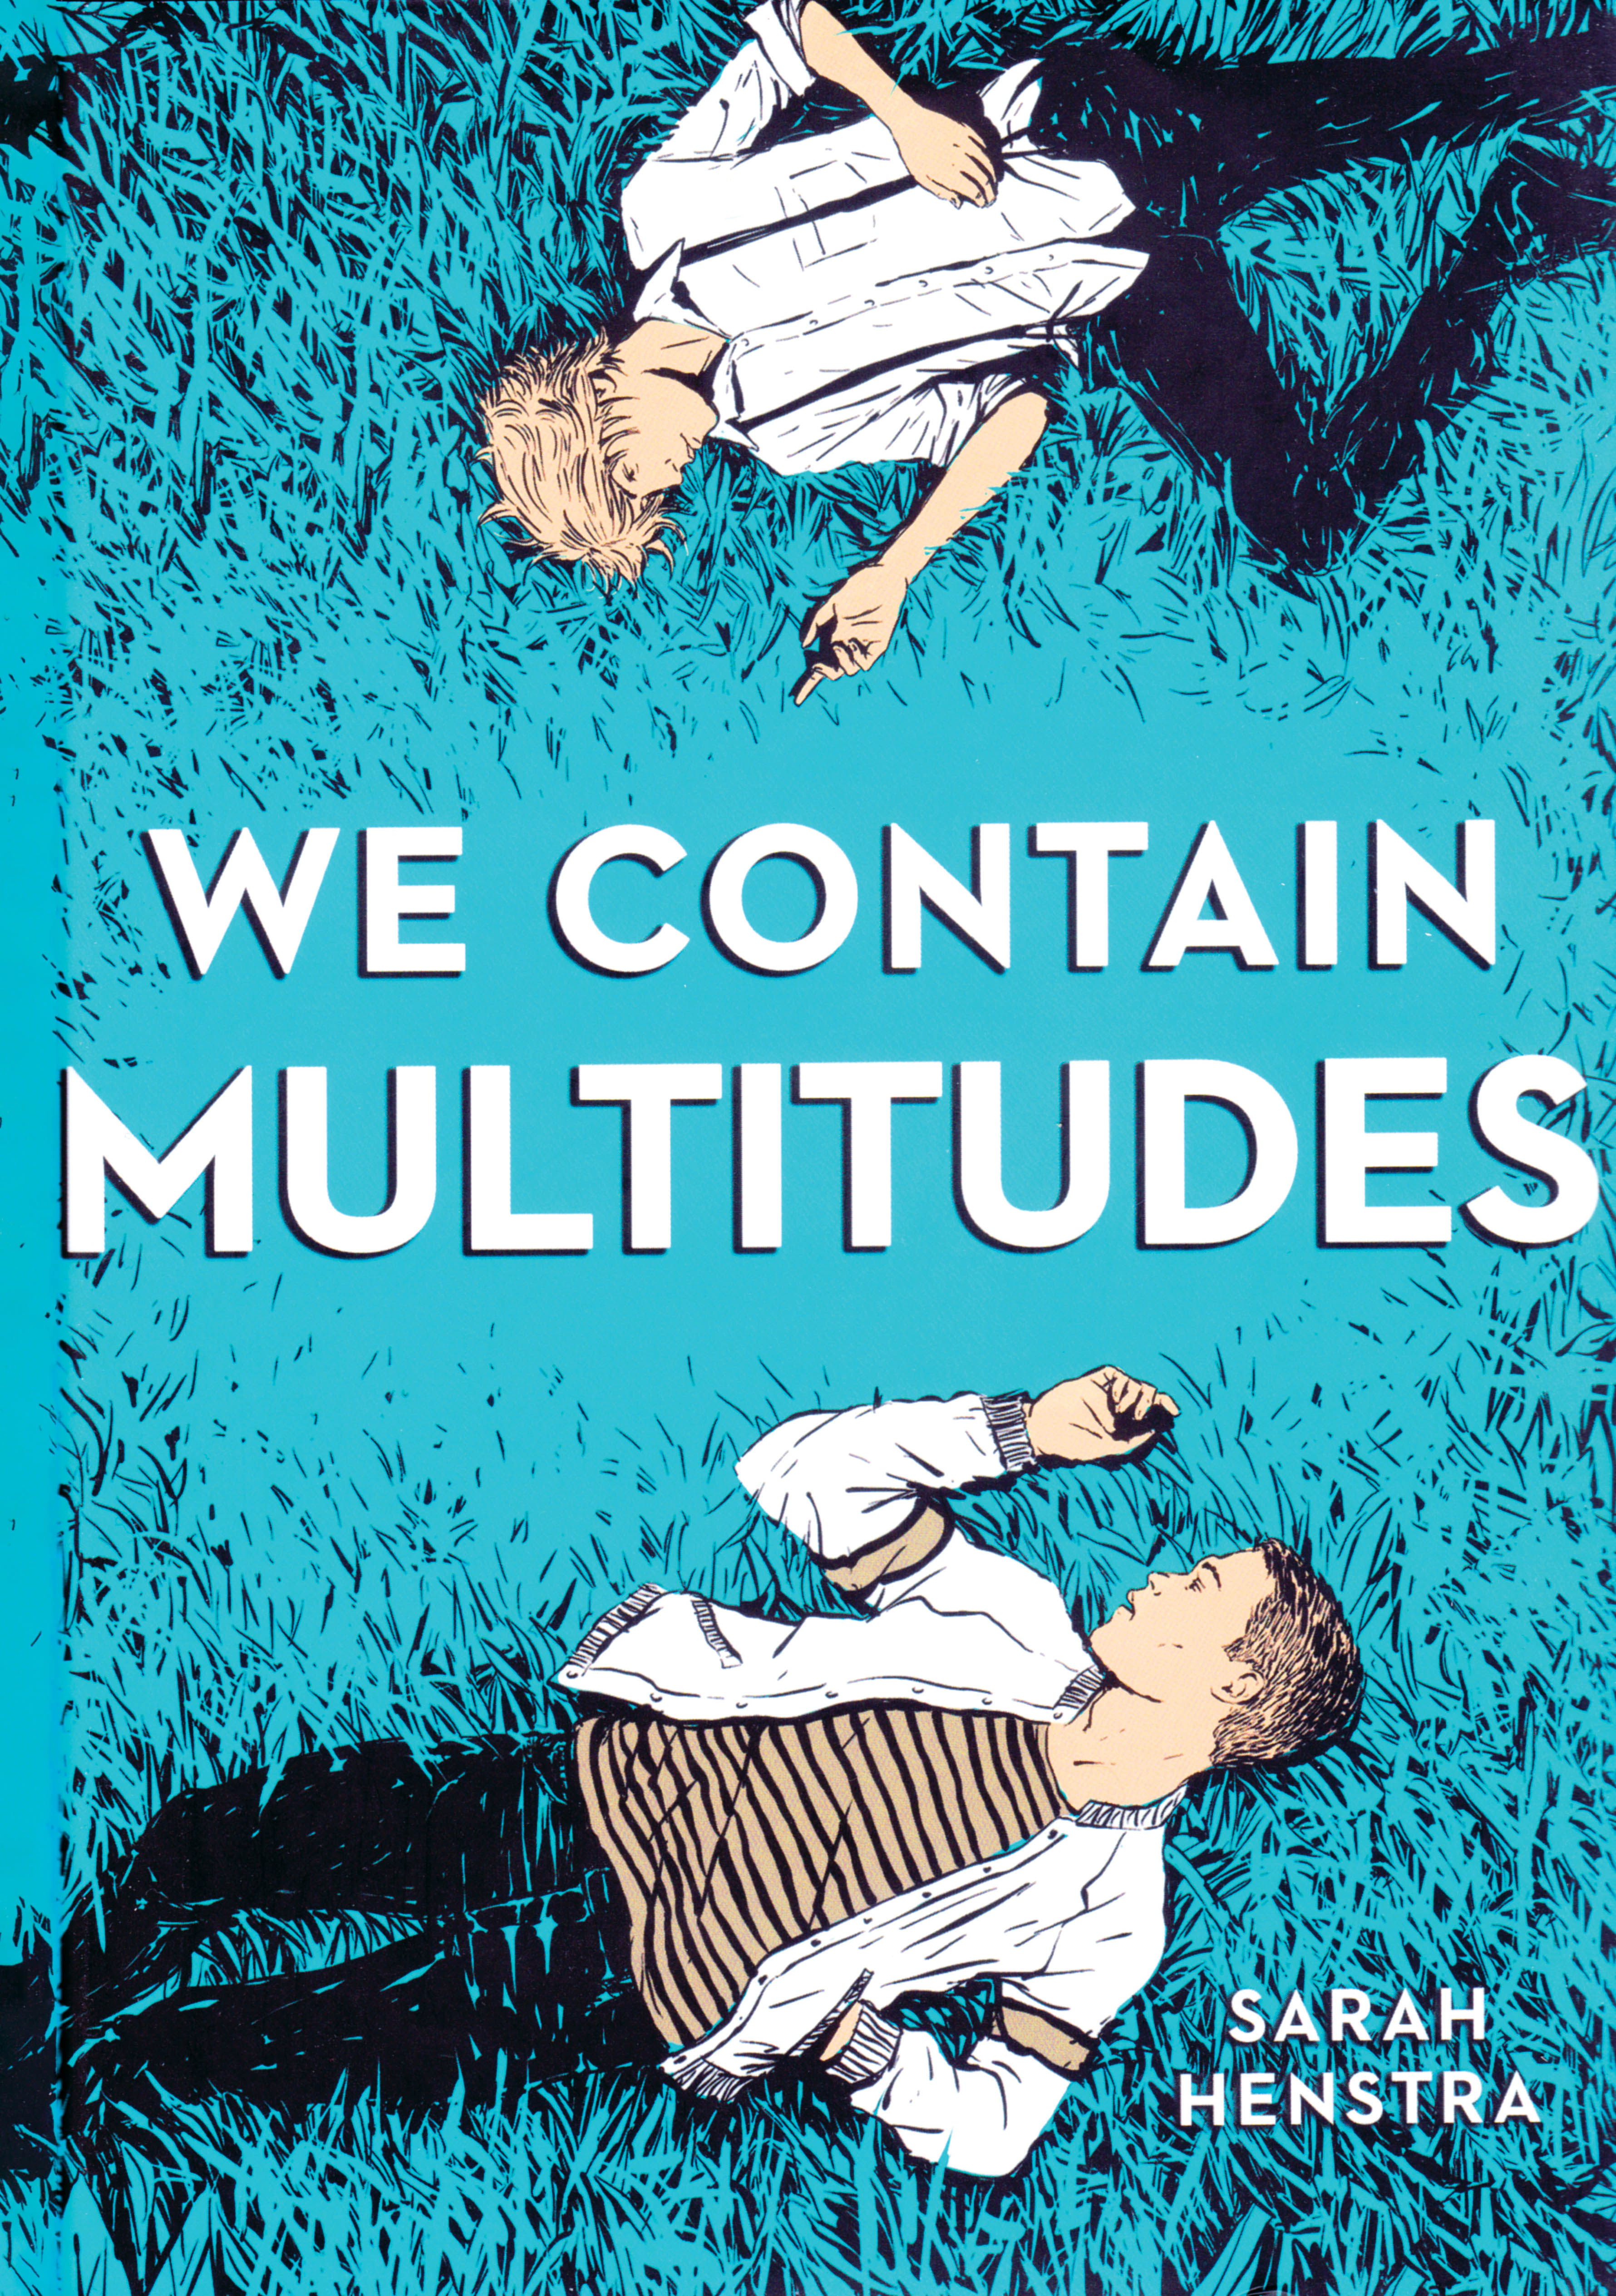 Photo of a book cover of 'We Contain Multitudes.' The cover is an illlustration of two people lying on their backs on the ground.